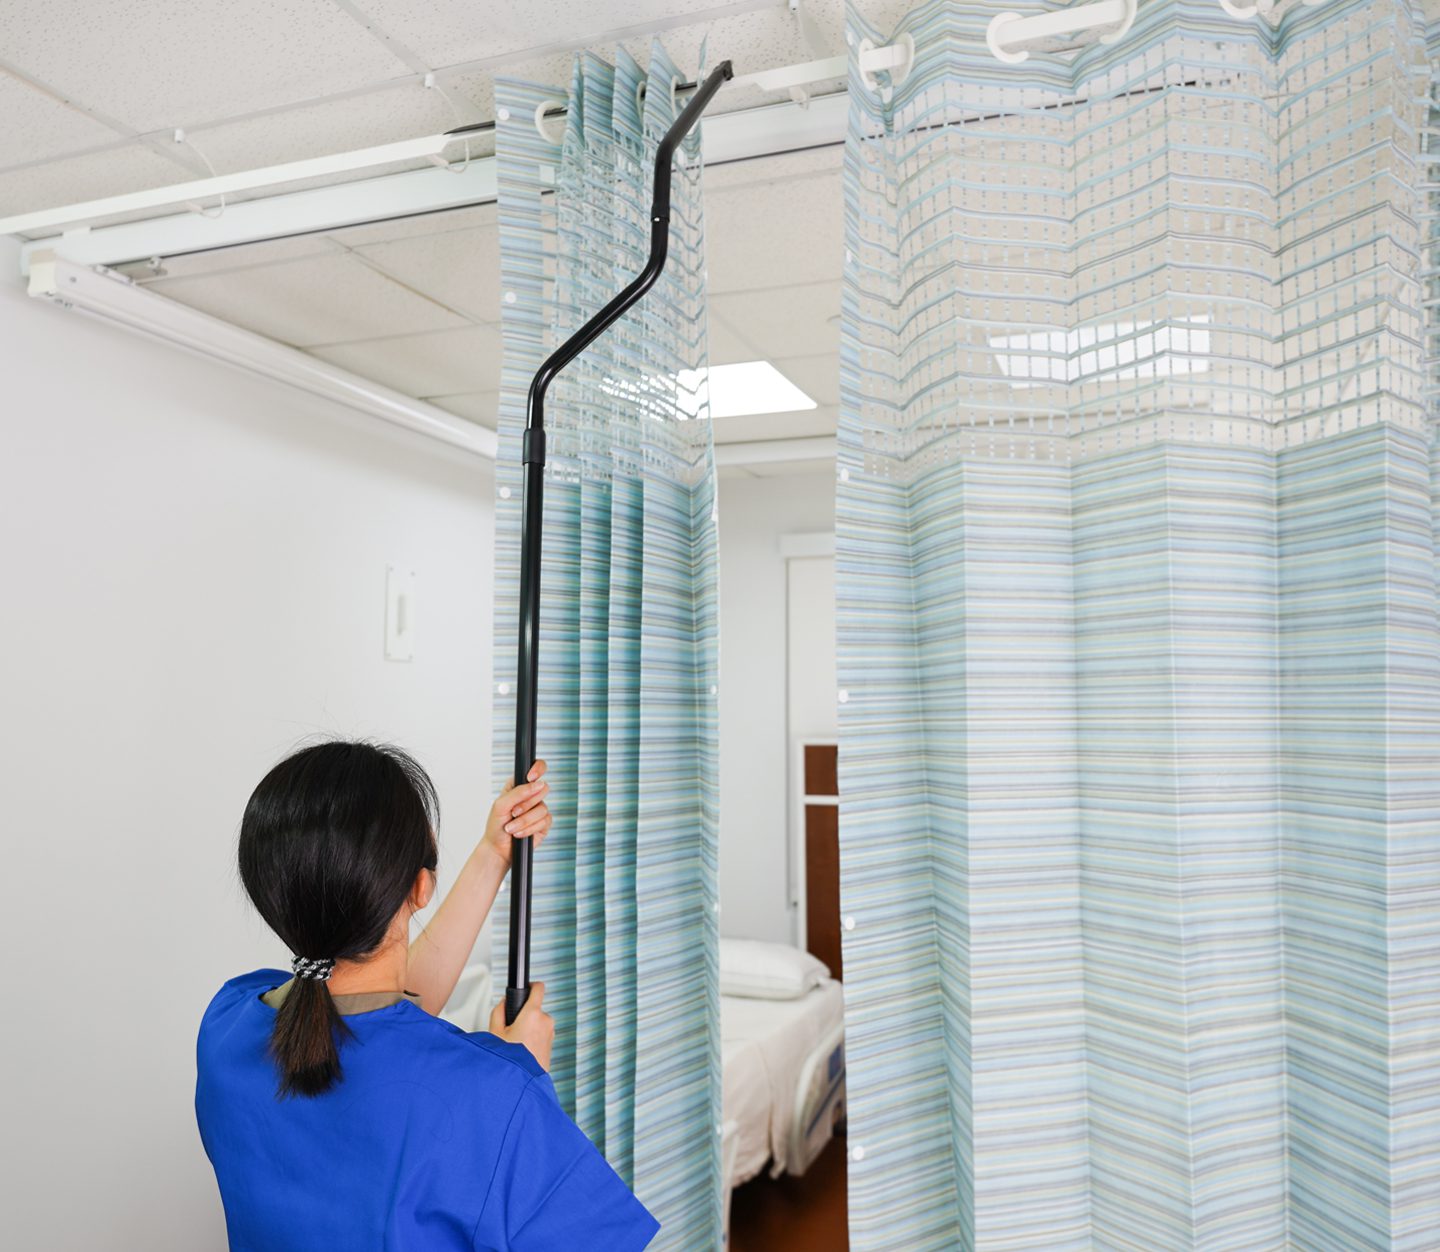 1 Rated Curtain Hooks Manufacturer & Wholesaler in Malaysia